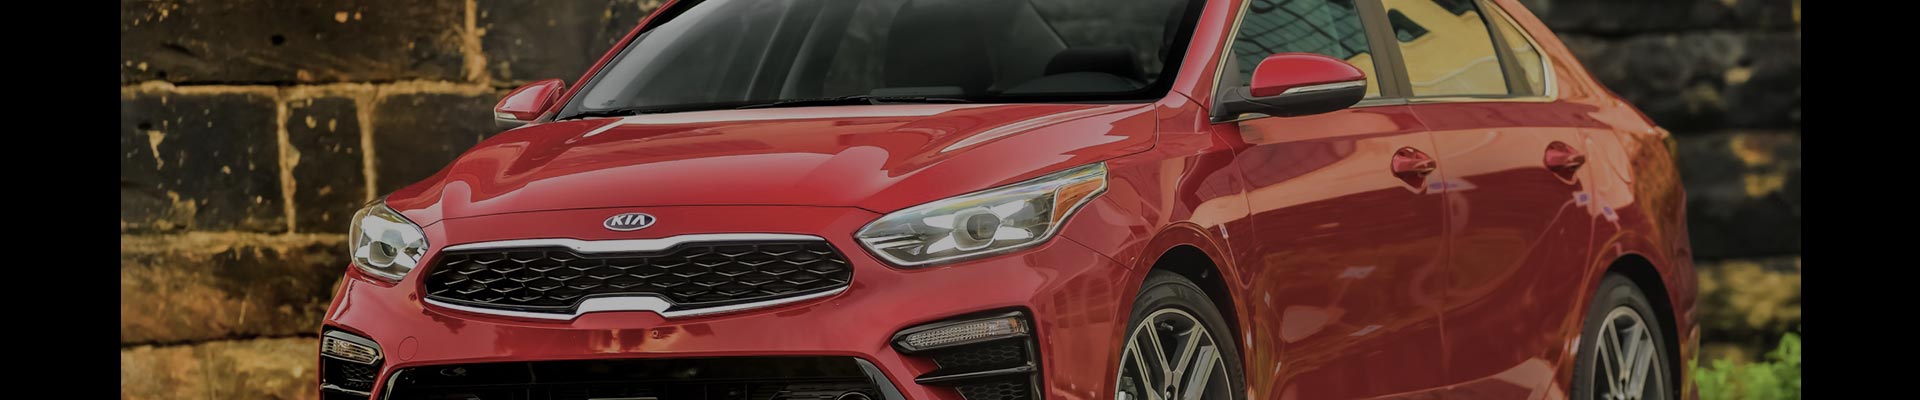 Shop Replacement and OEM 2020 Kia Forte Parts with Discounted Price on the Net